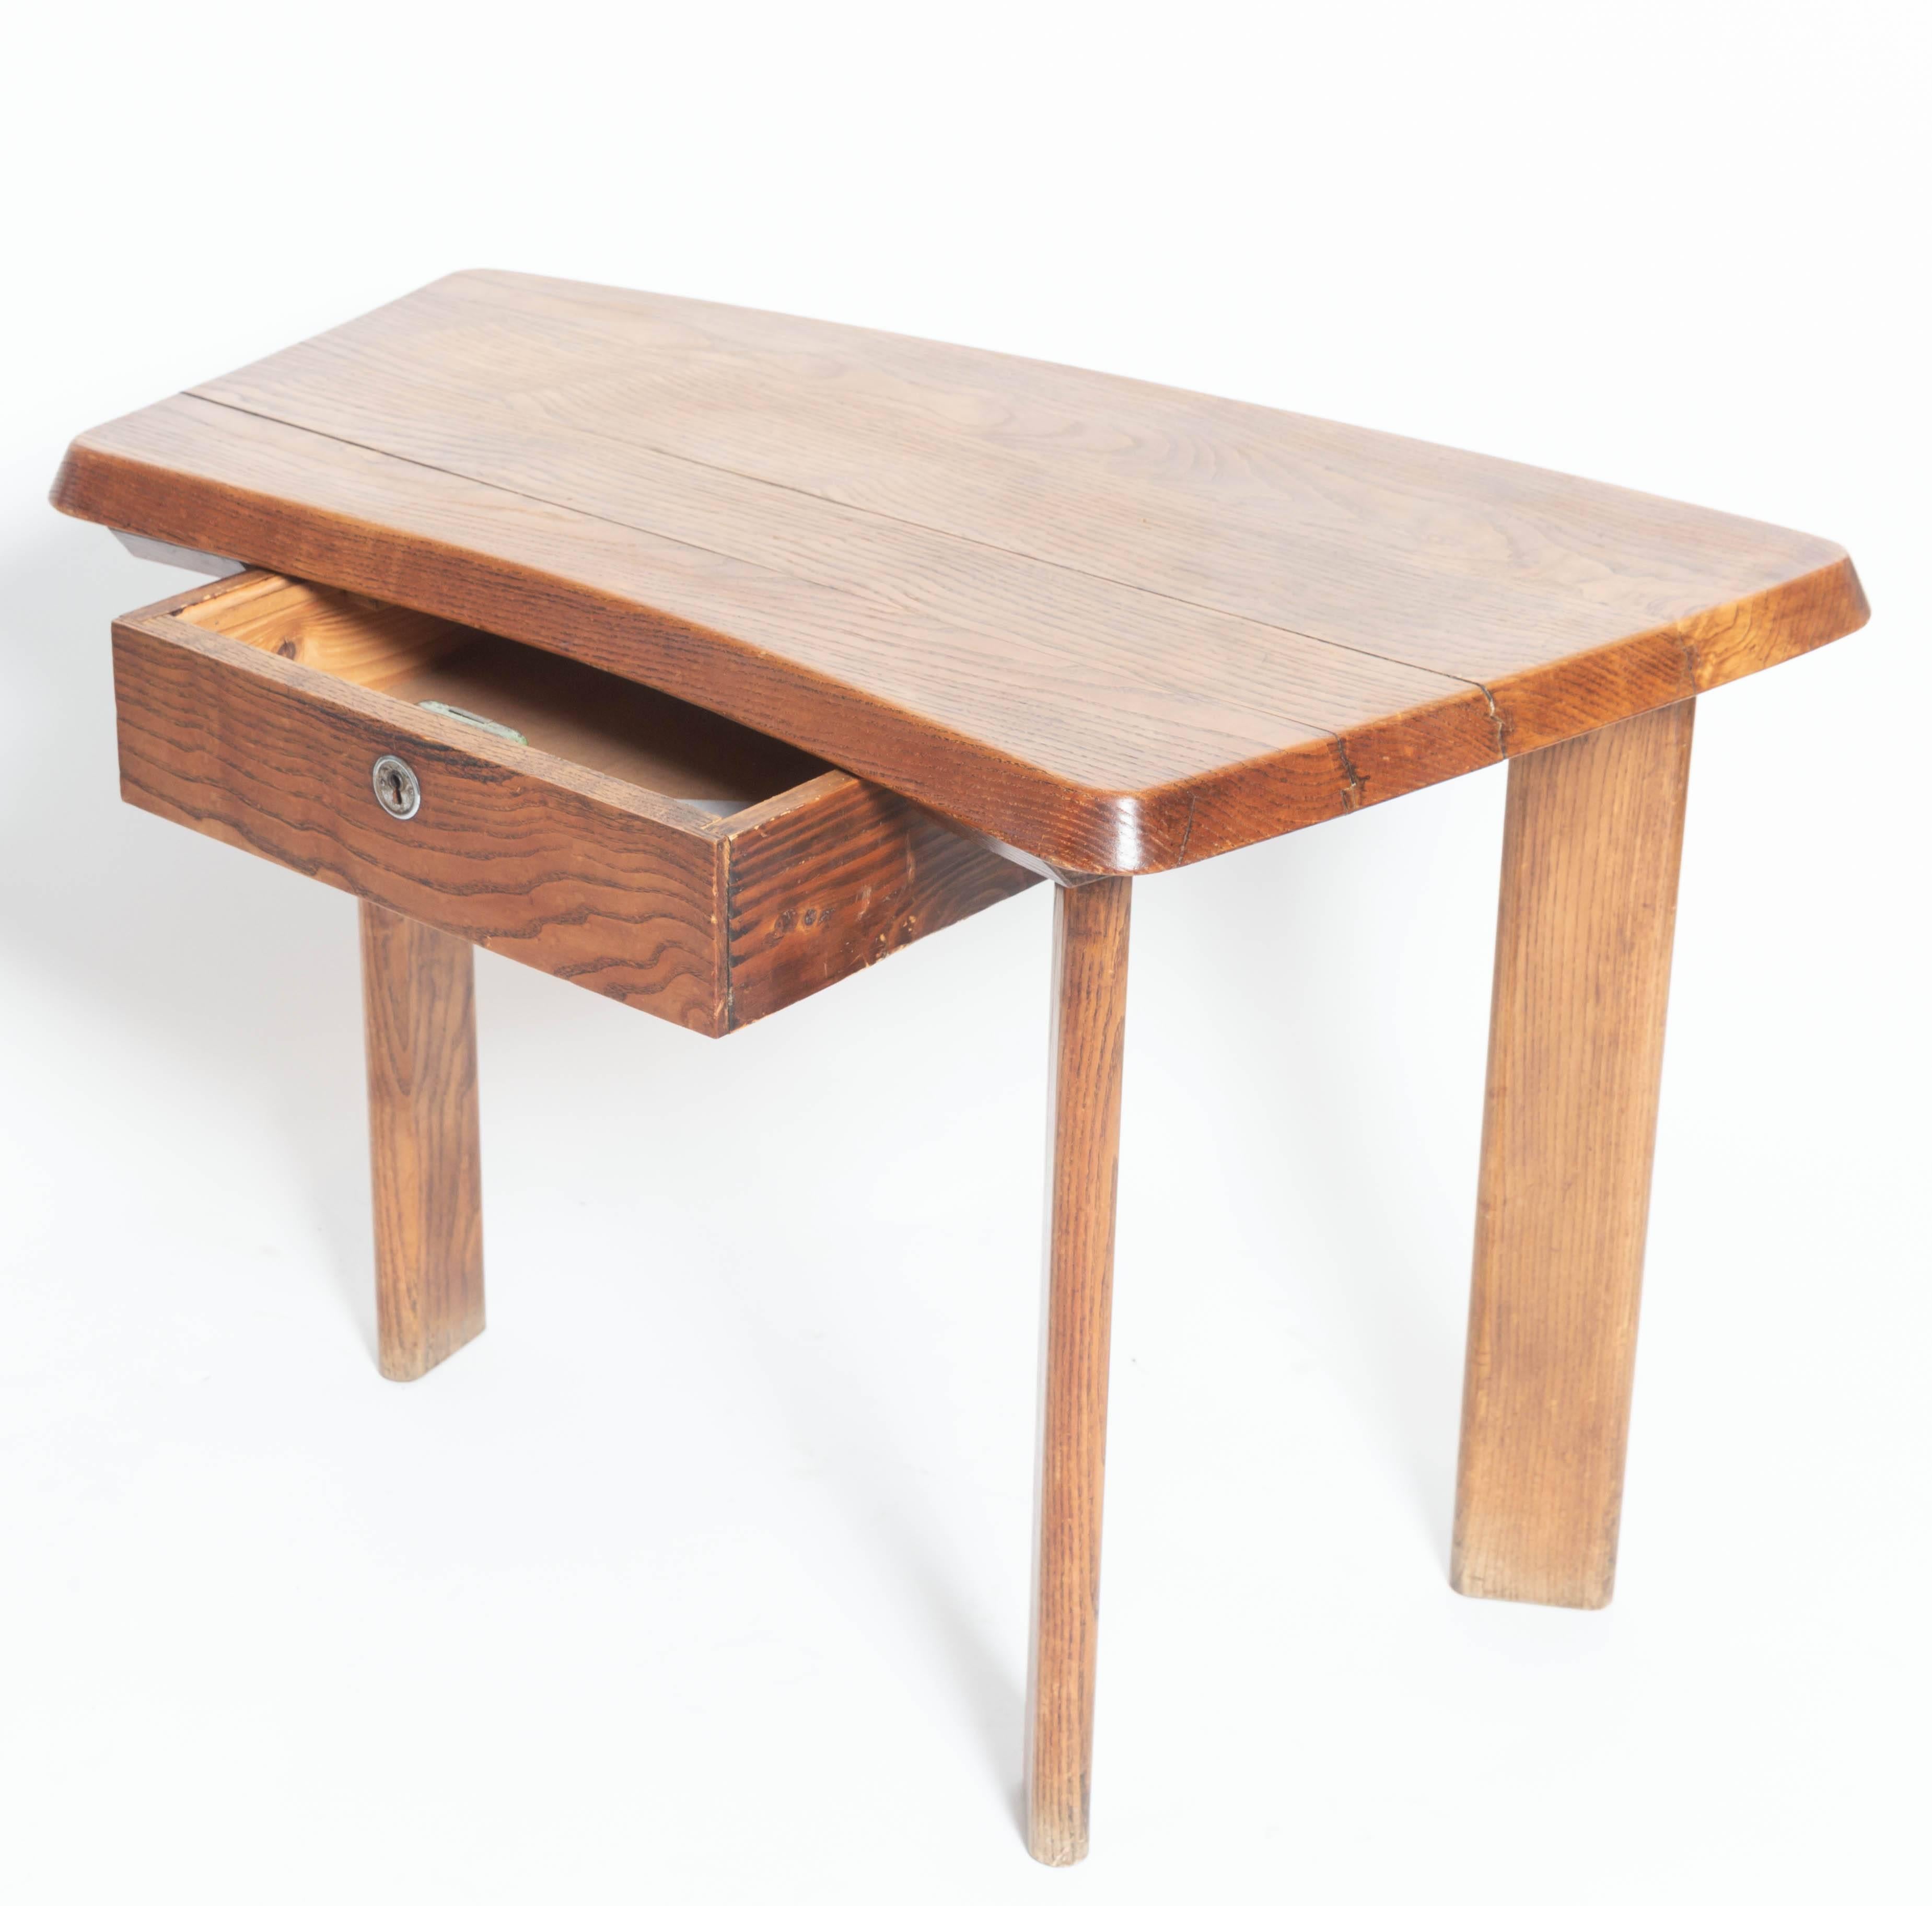 Wooden oak table with drawer and three legs, in the manner of Charlotte Perriand.